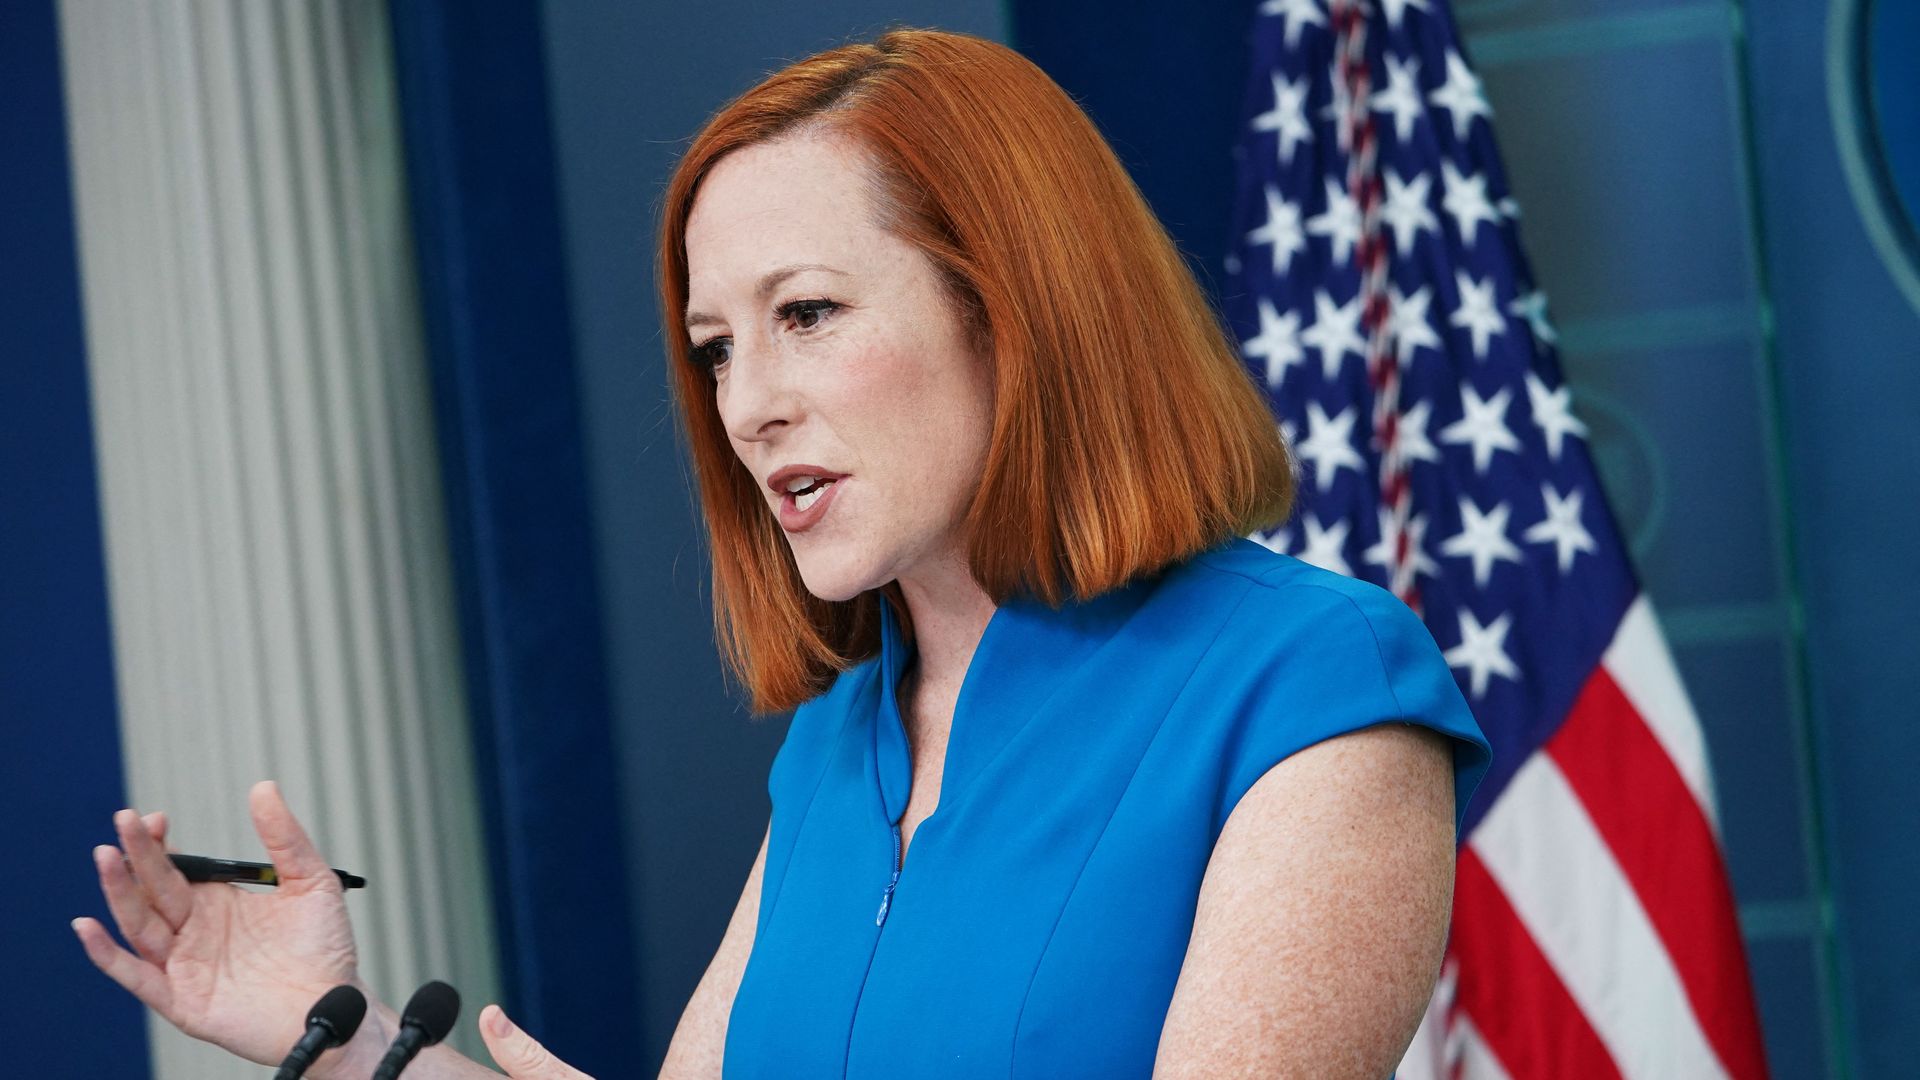 White House Press Secretary Jen Psaki speaks during the daily briefing in the James S Brady Press Briefing Room of the White House in Washington, DC, on April 13, 2022